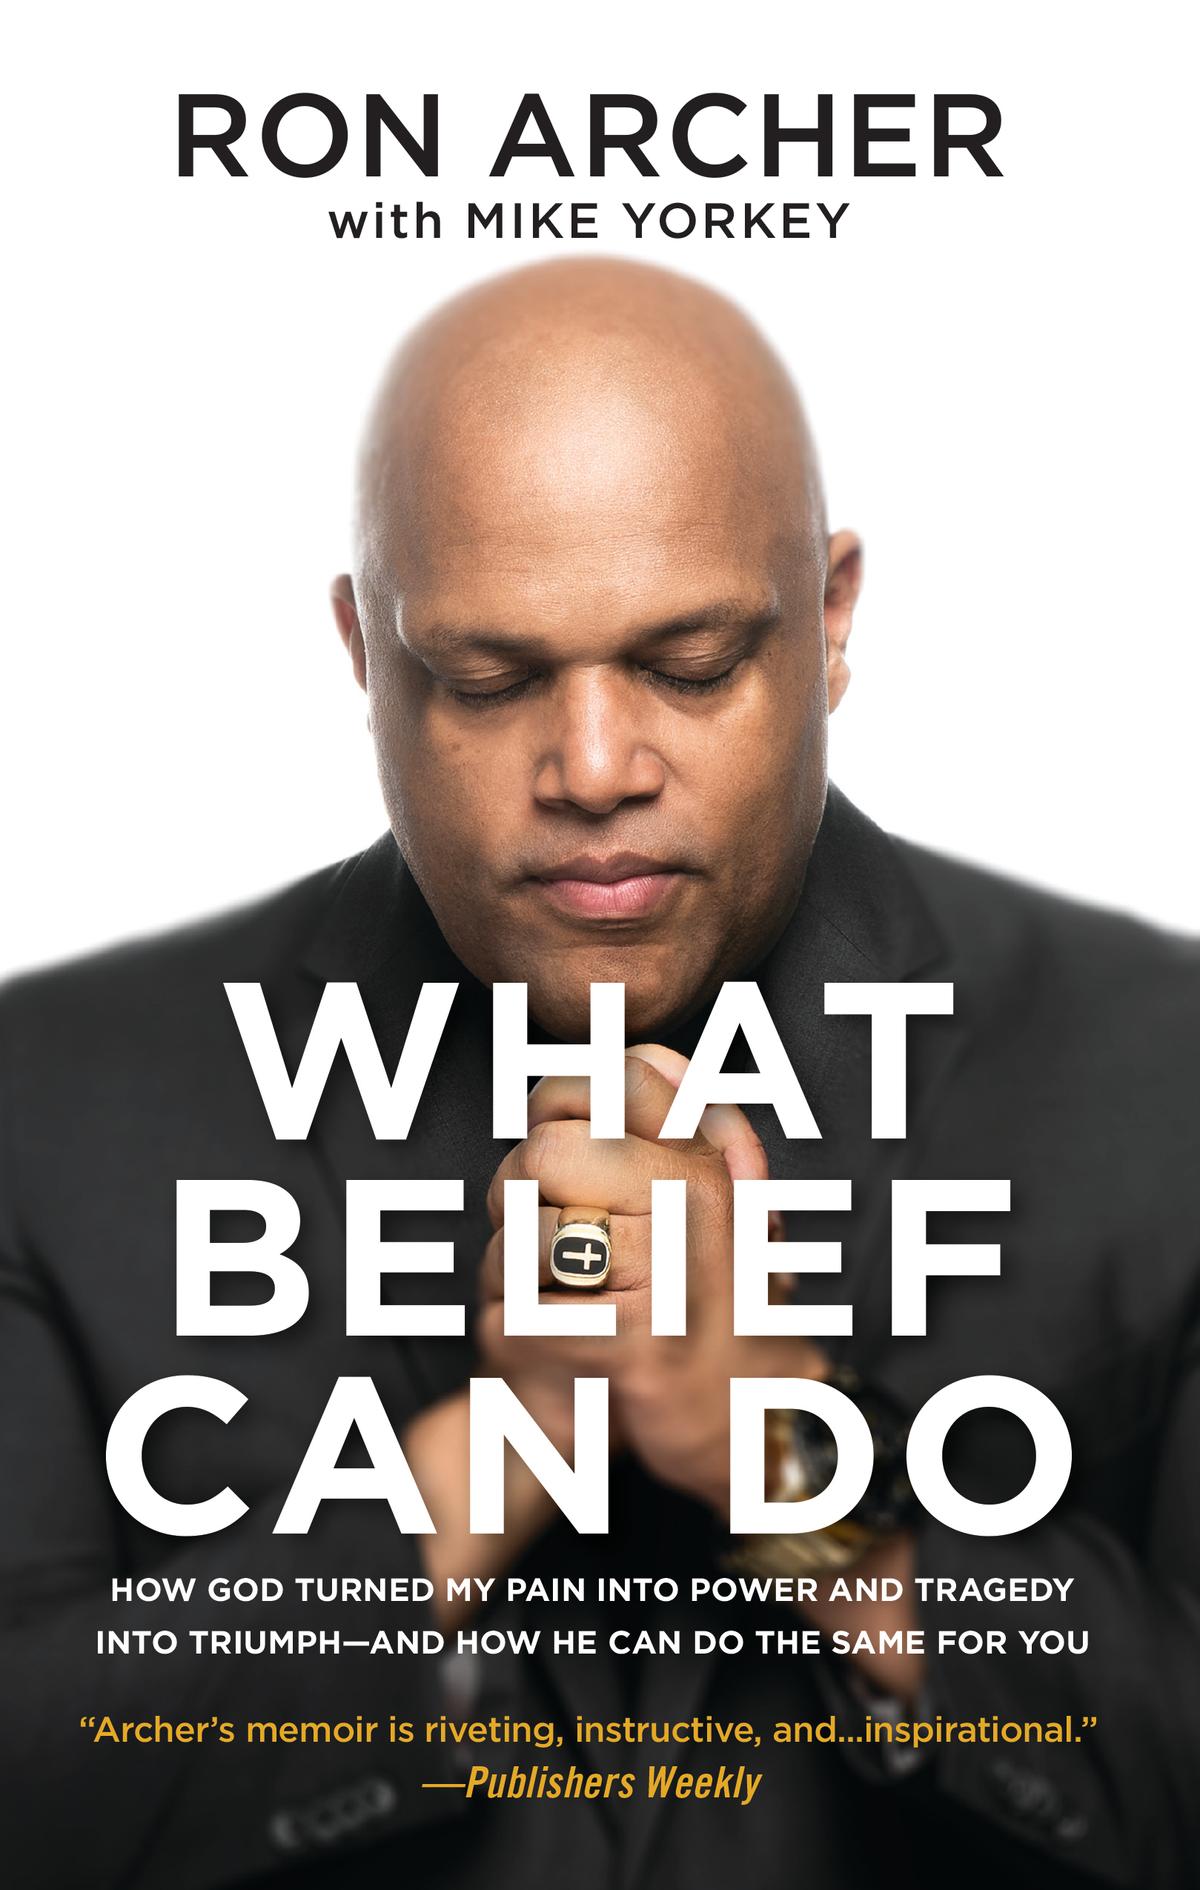 "What Belief Can Do" by Ron Archer with Mike Yorkey (Salem Books, $16.99).